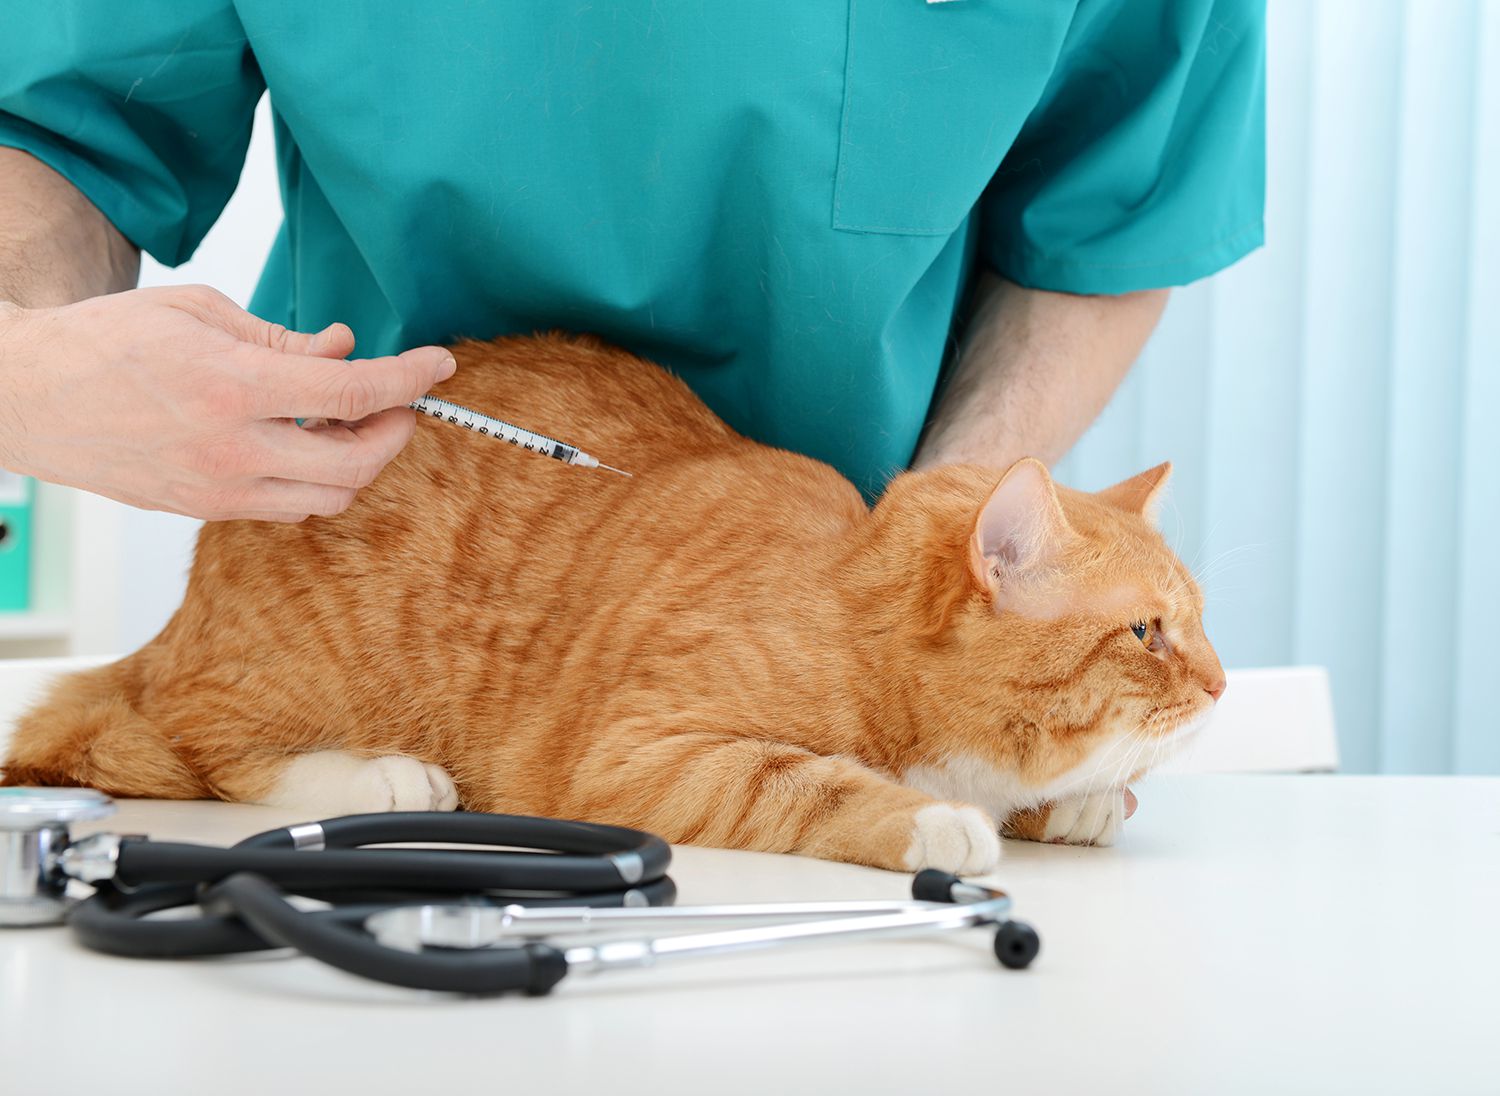 DIABETES IN CATS AND DOGS